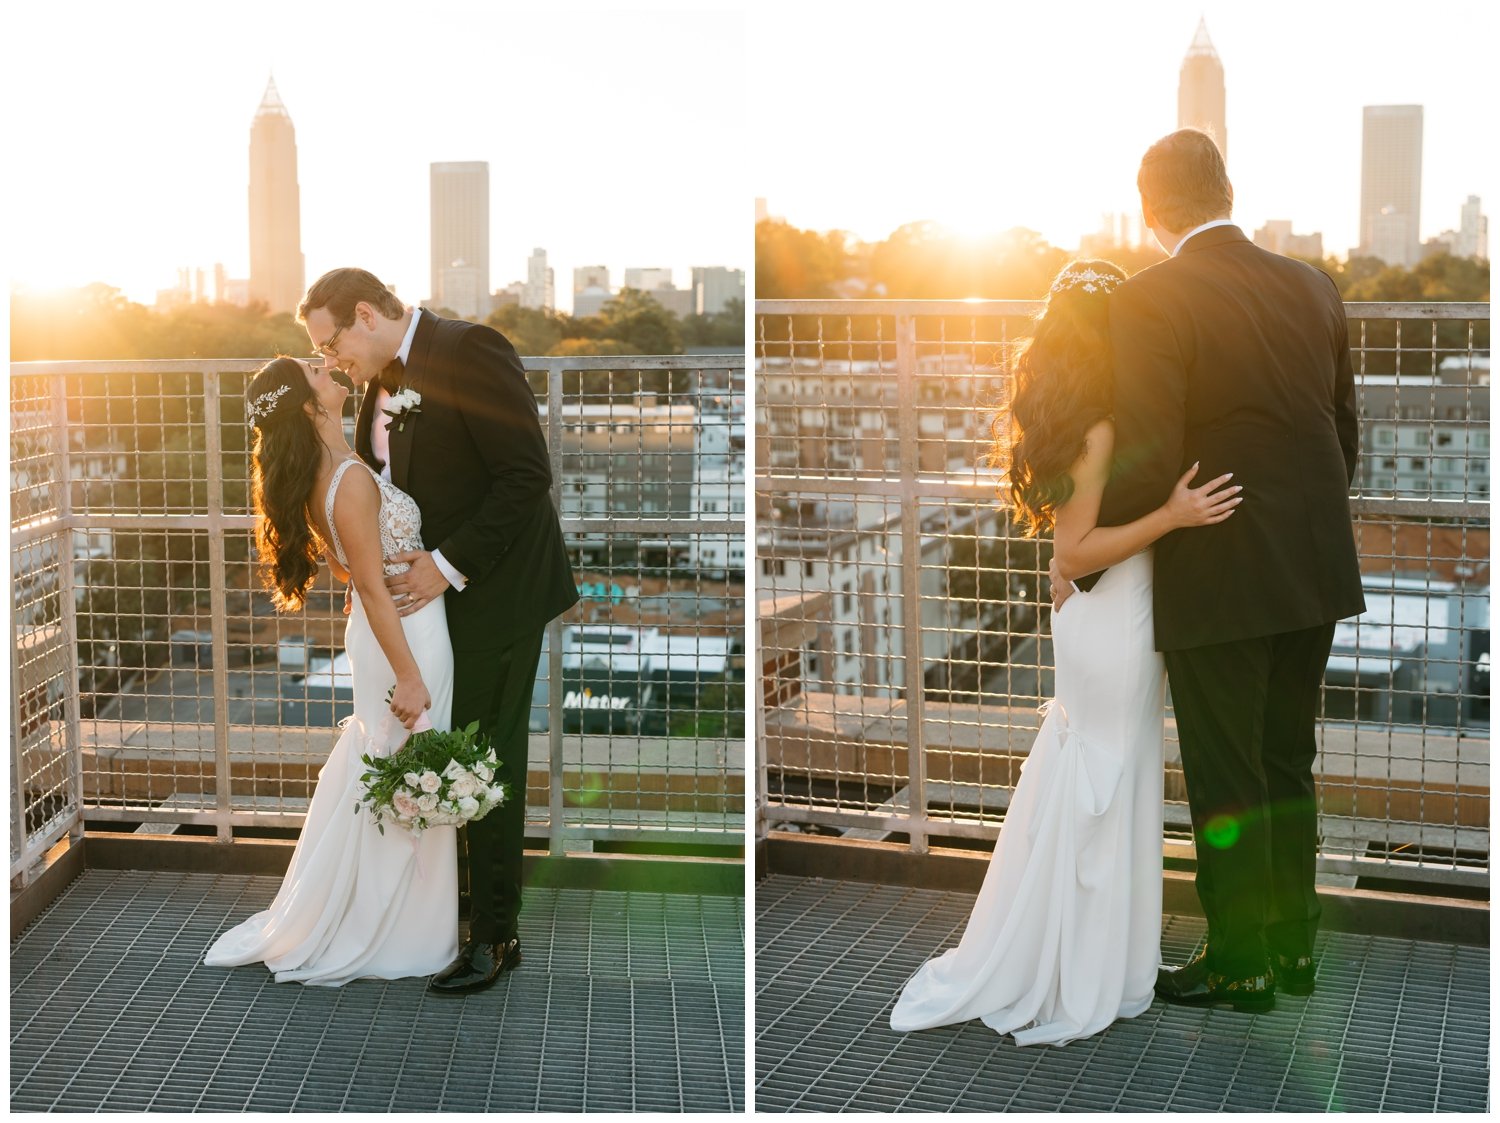 The couple watches the sun set over Atlanta after their Ponce City Market wedding